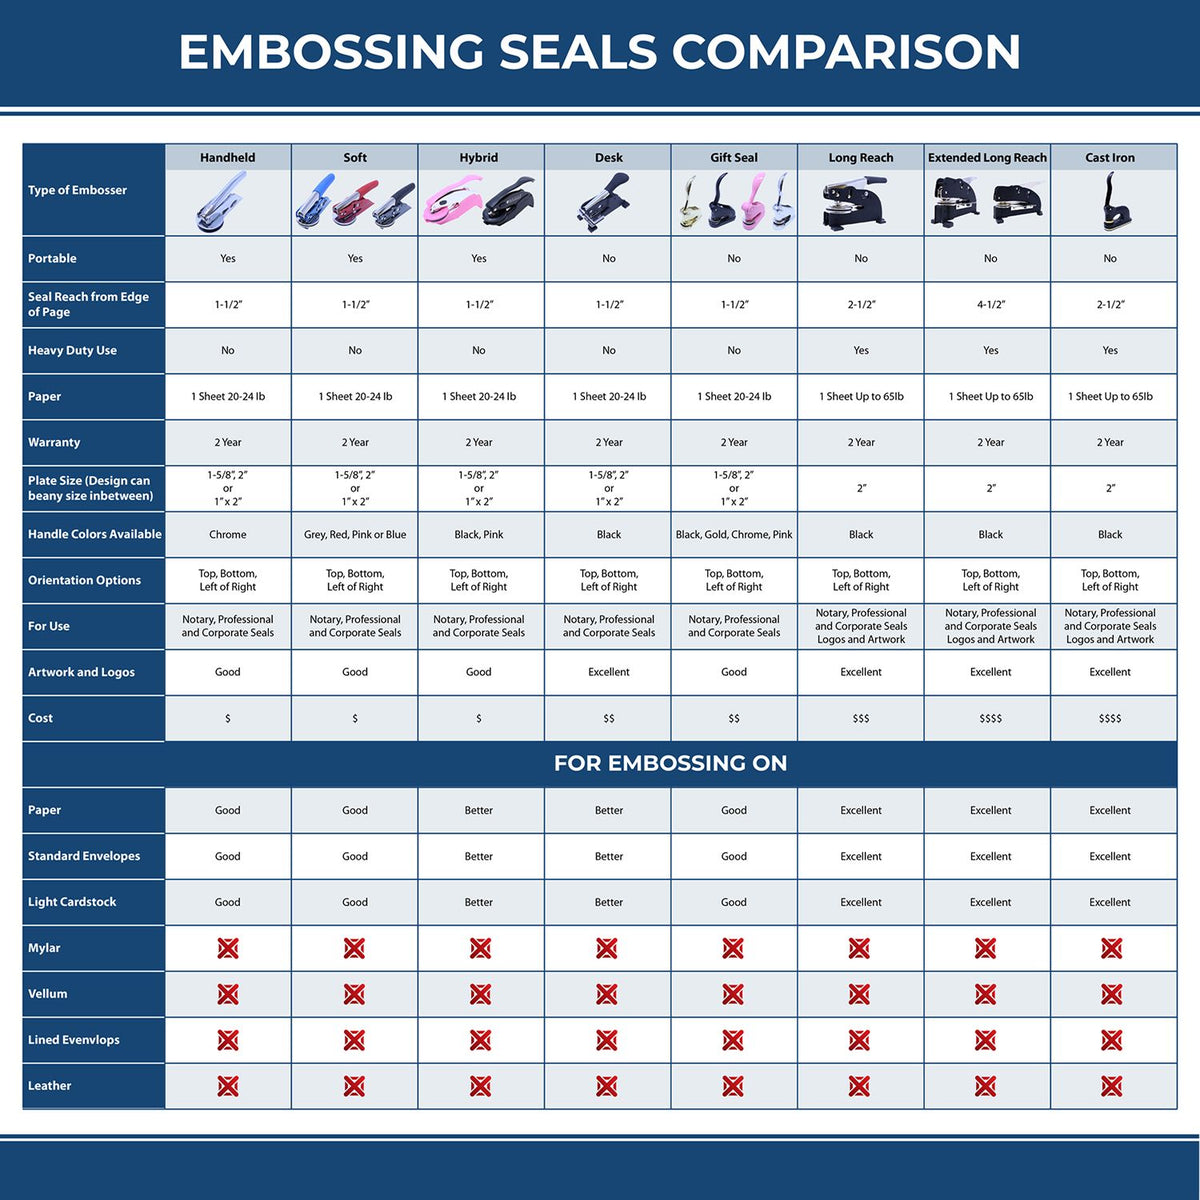 A comparison chart for the different types of mount models available for the Soft Alaska Professional Geologist Seal